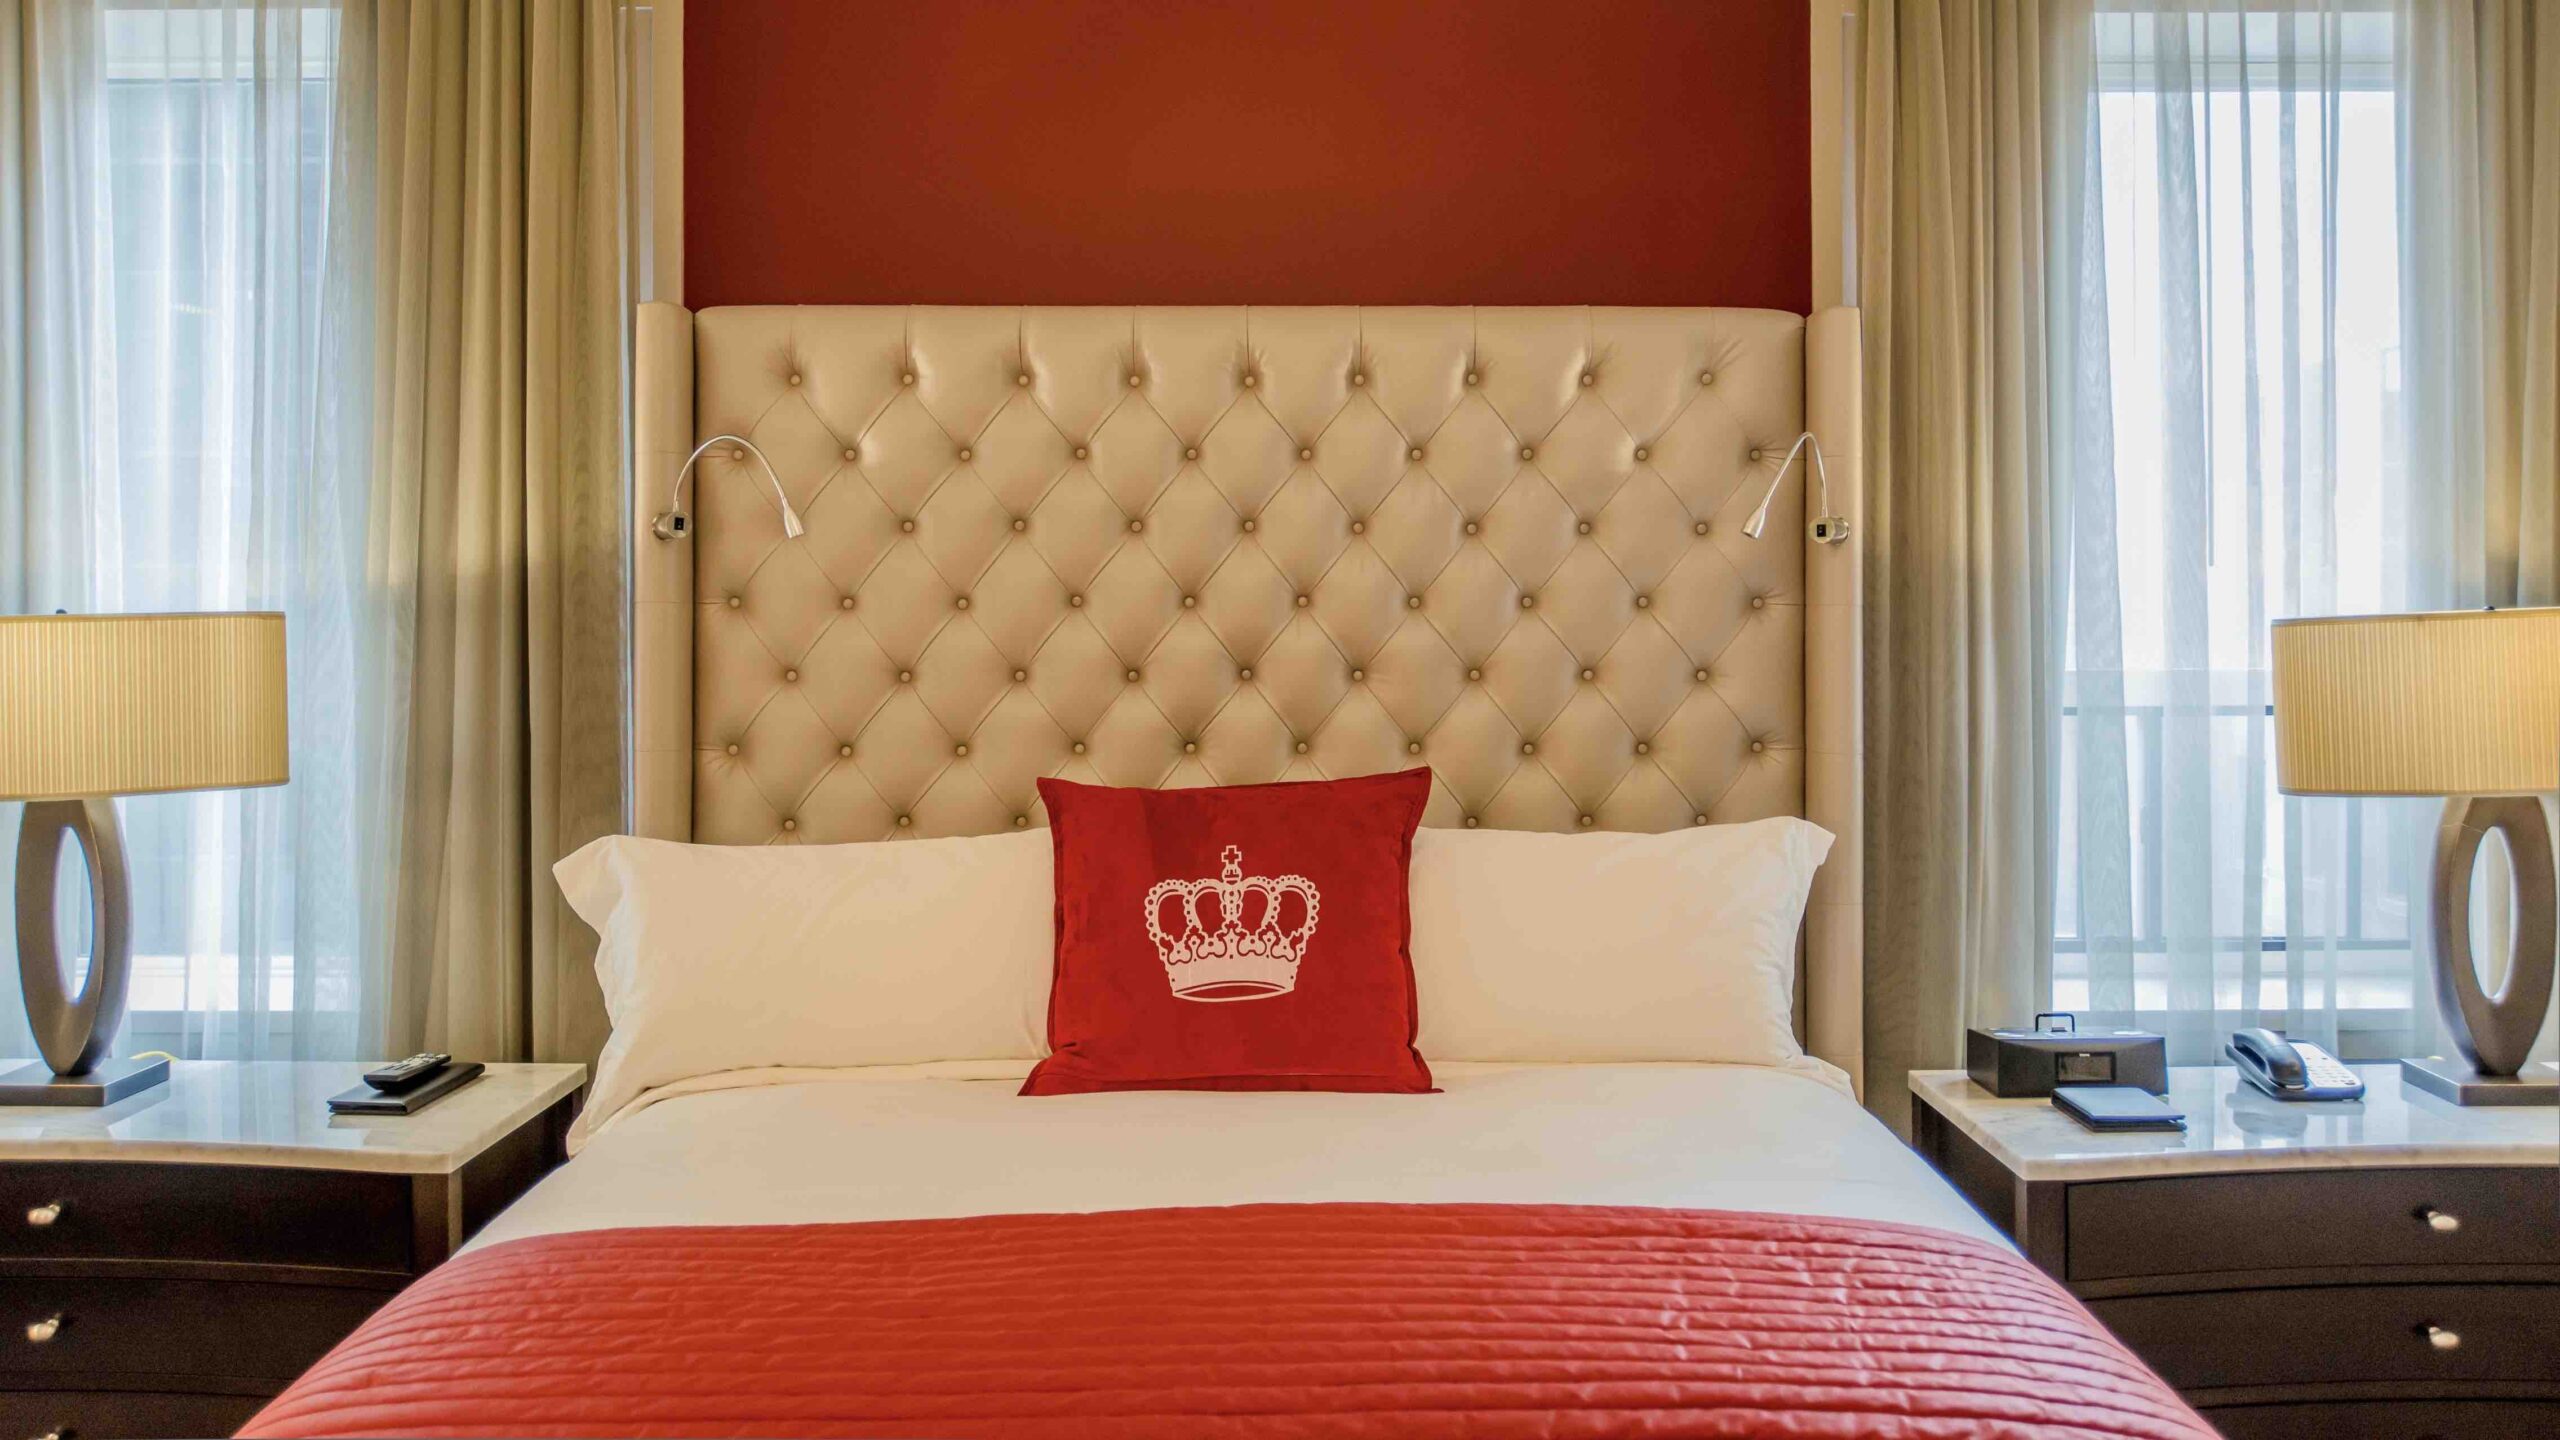 The ritzy King Eddy has been a must stay for celebrities for decades (Photo courtesy Omni King Edward Hotel)